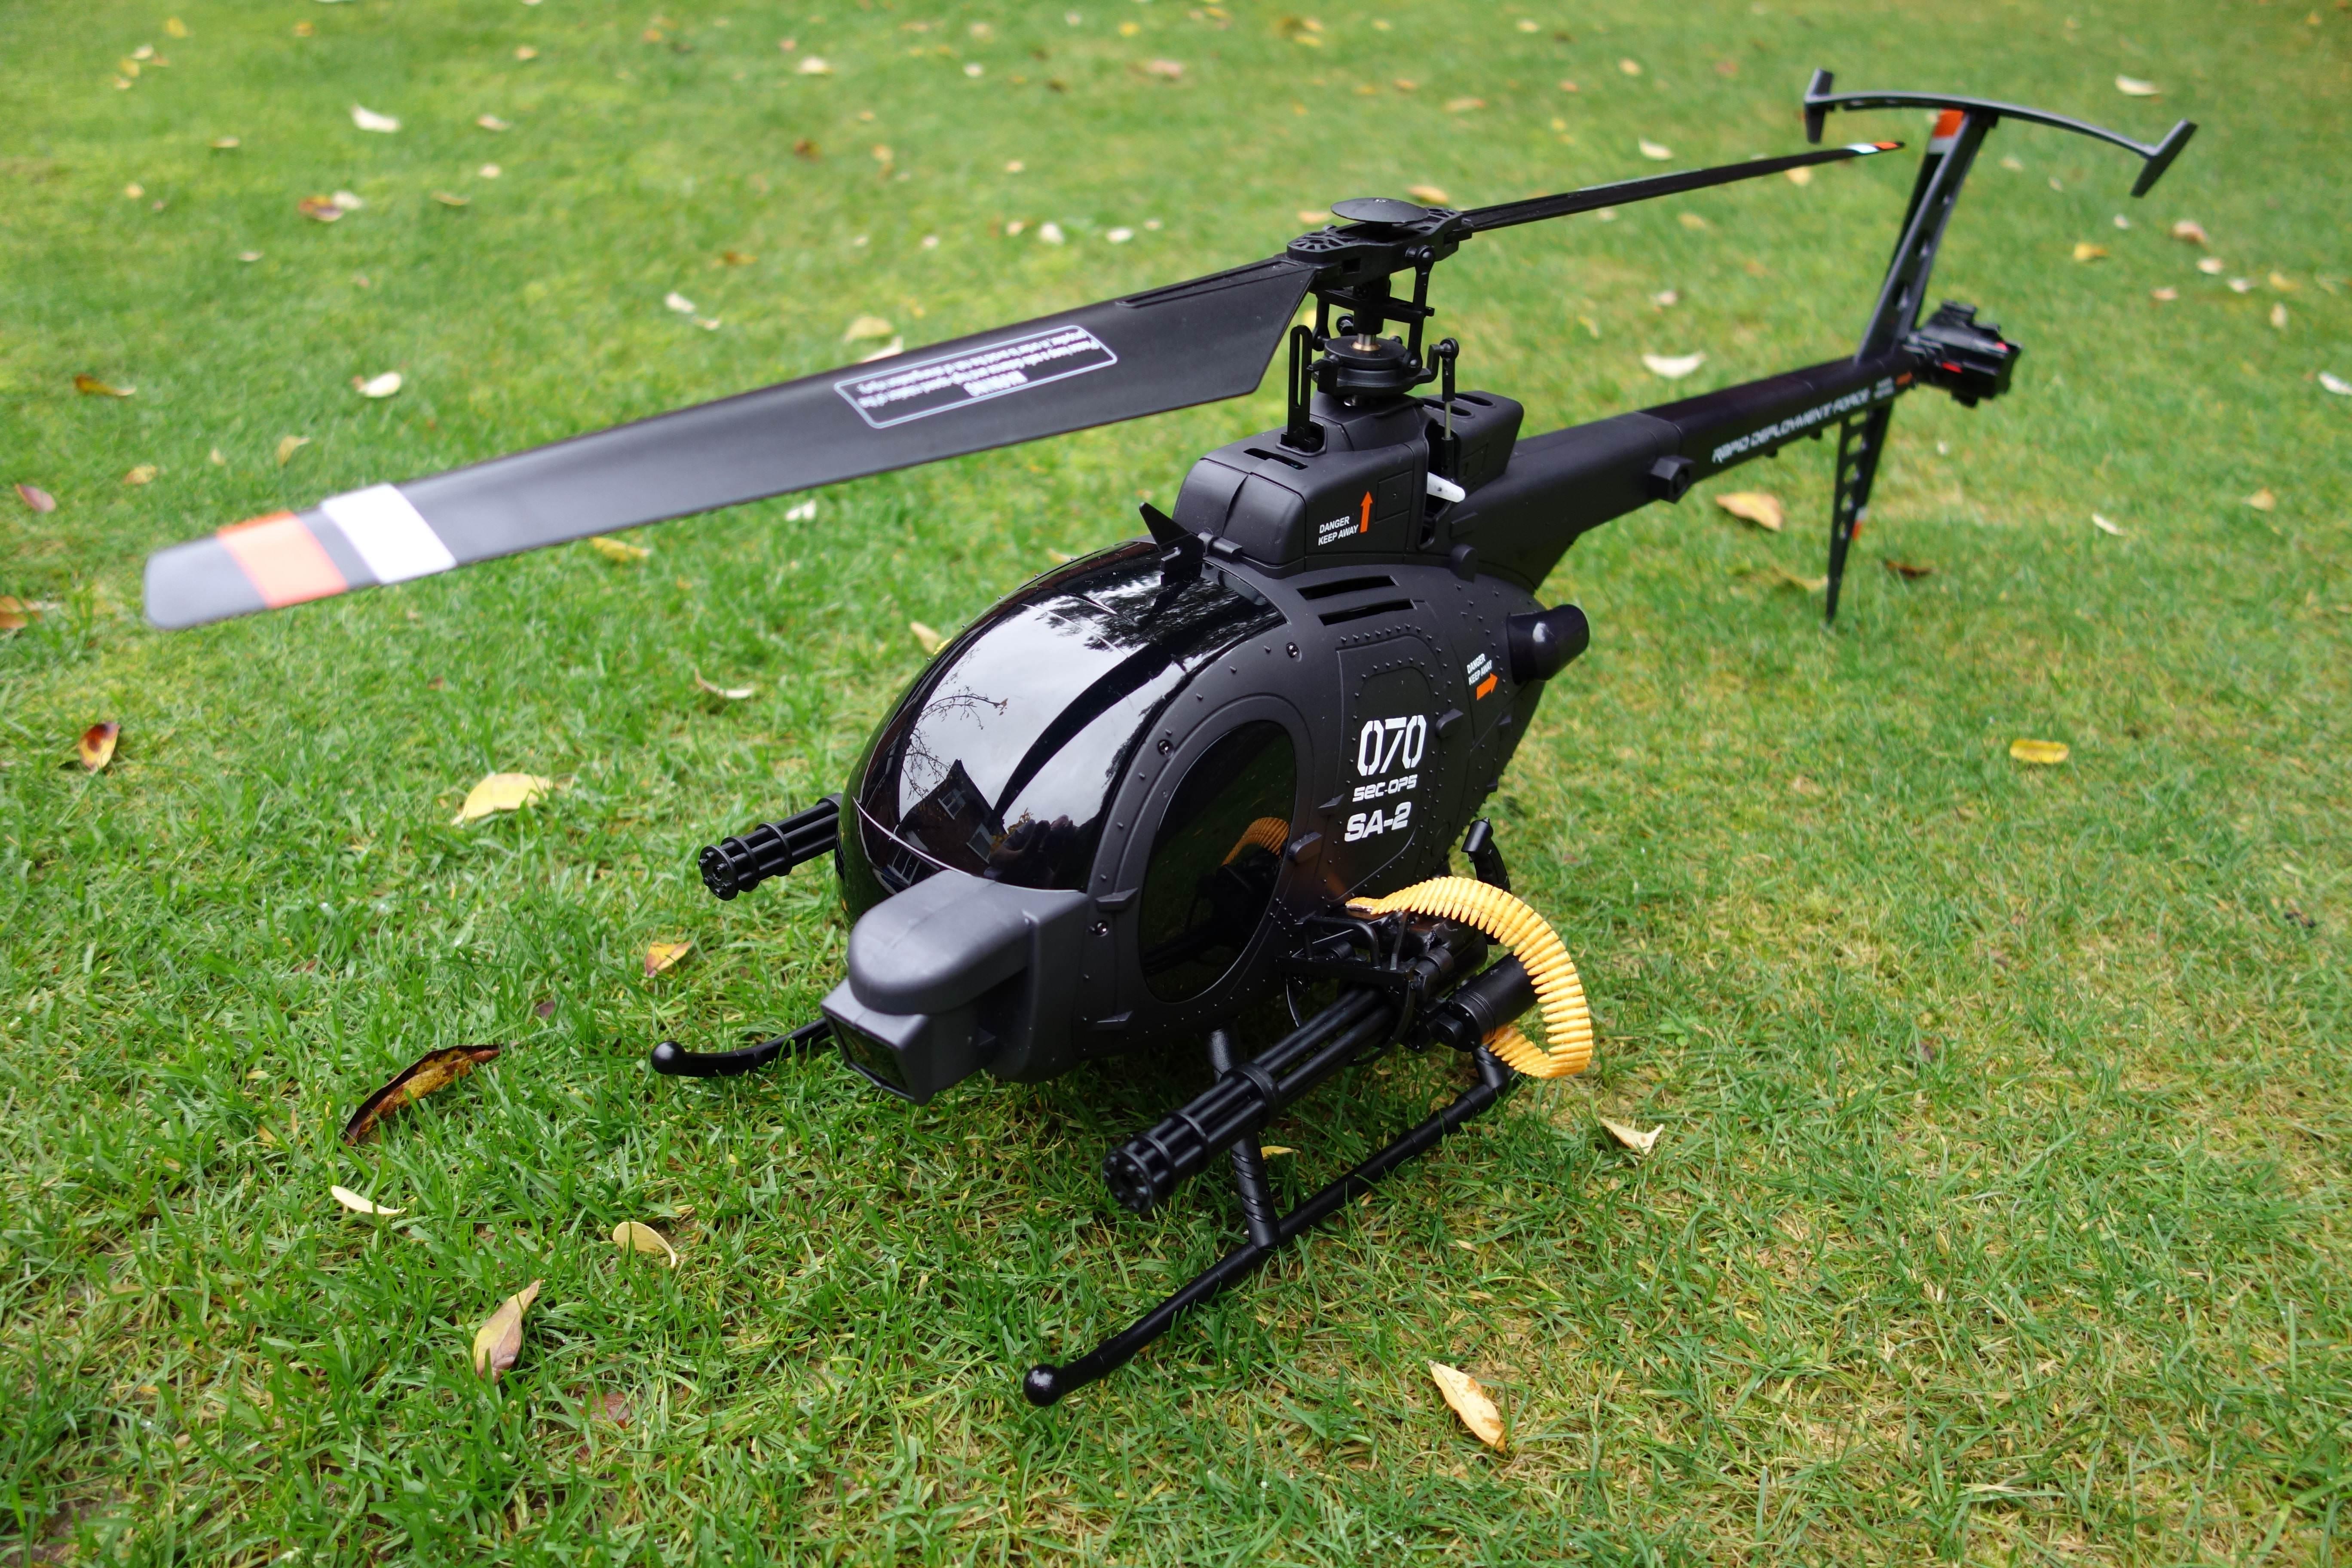 Fx070C Rc Helicopter: Affordable and user-friendly, but may not satisfy advanced pilots.